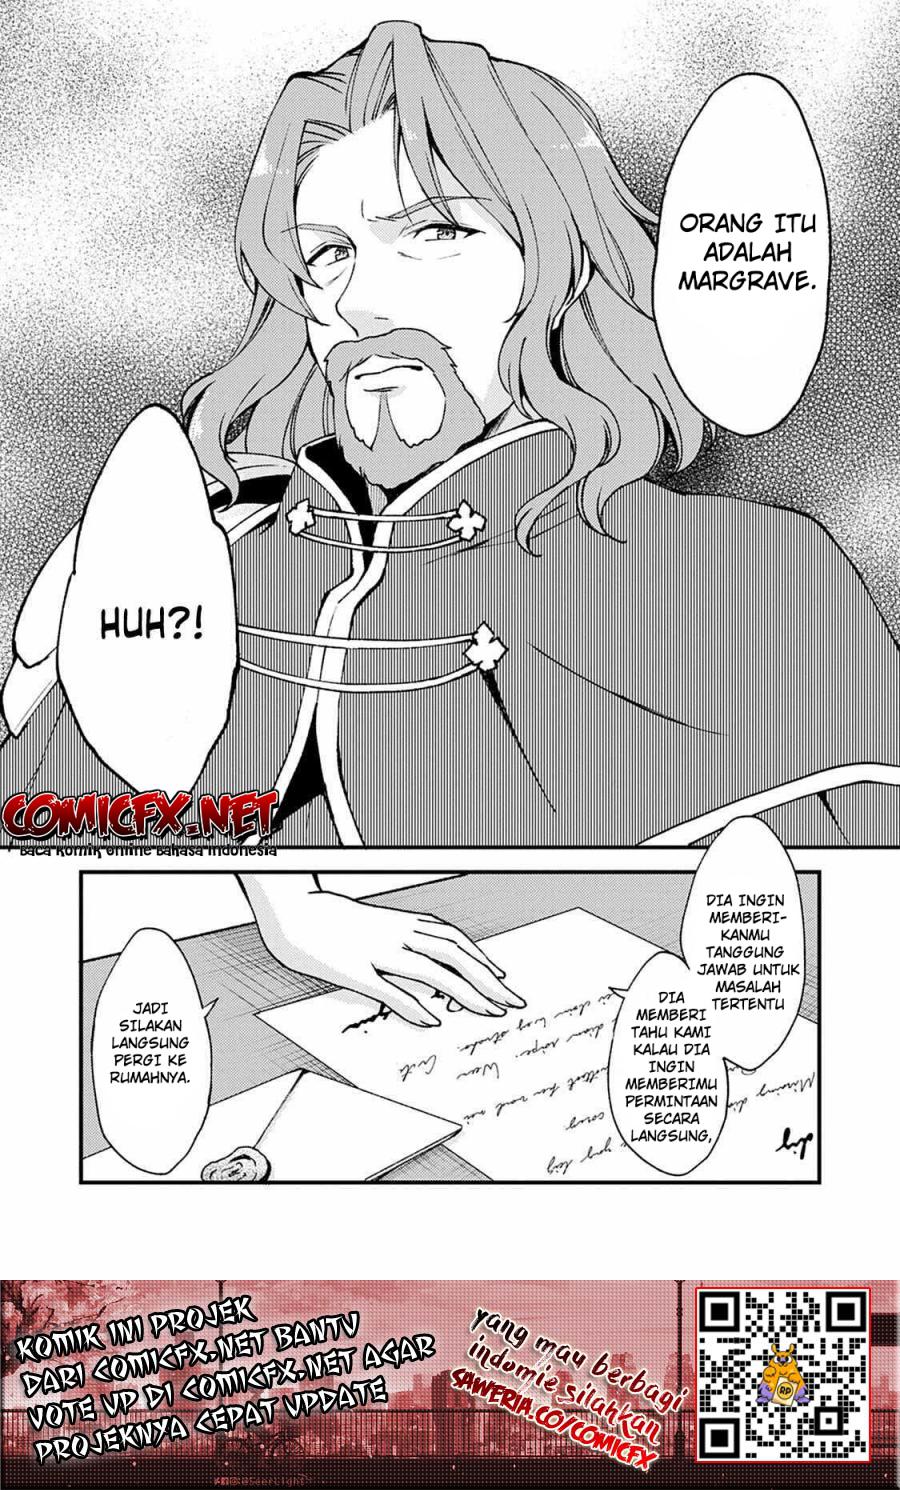 A Sword Master Childhood Friend Power Harassed Me Harshly, So I Broke off Our Relationship and Make a Fresh Start at the Frontier as a Magic Swordsman Chapter 8.1 9